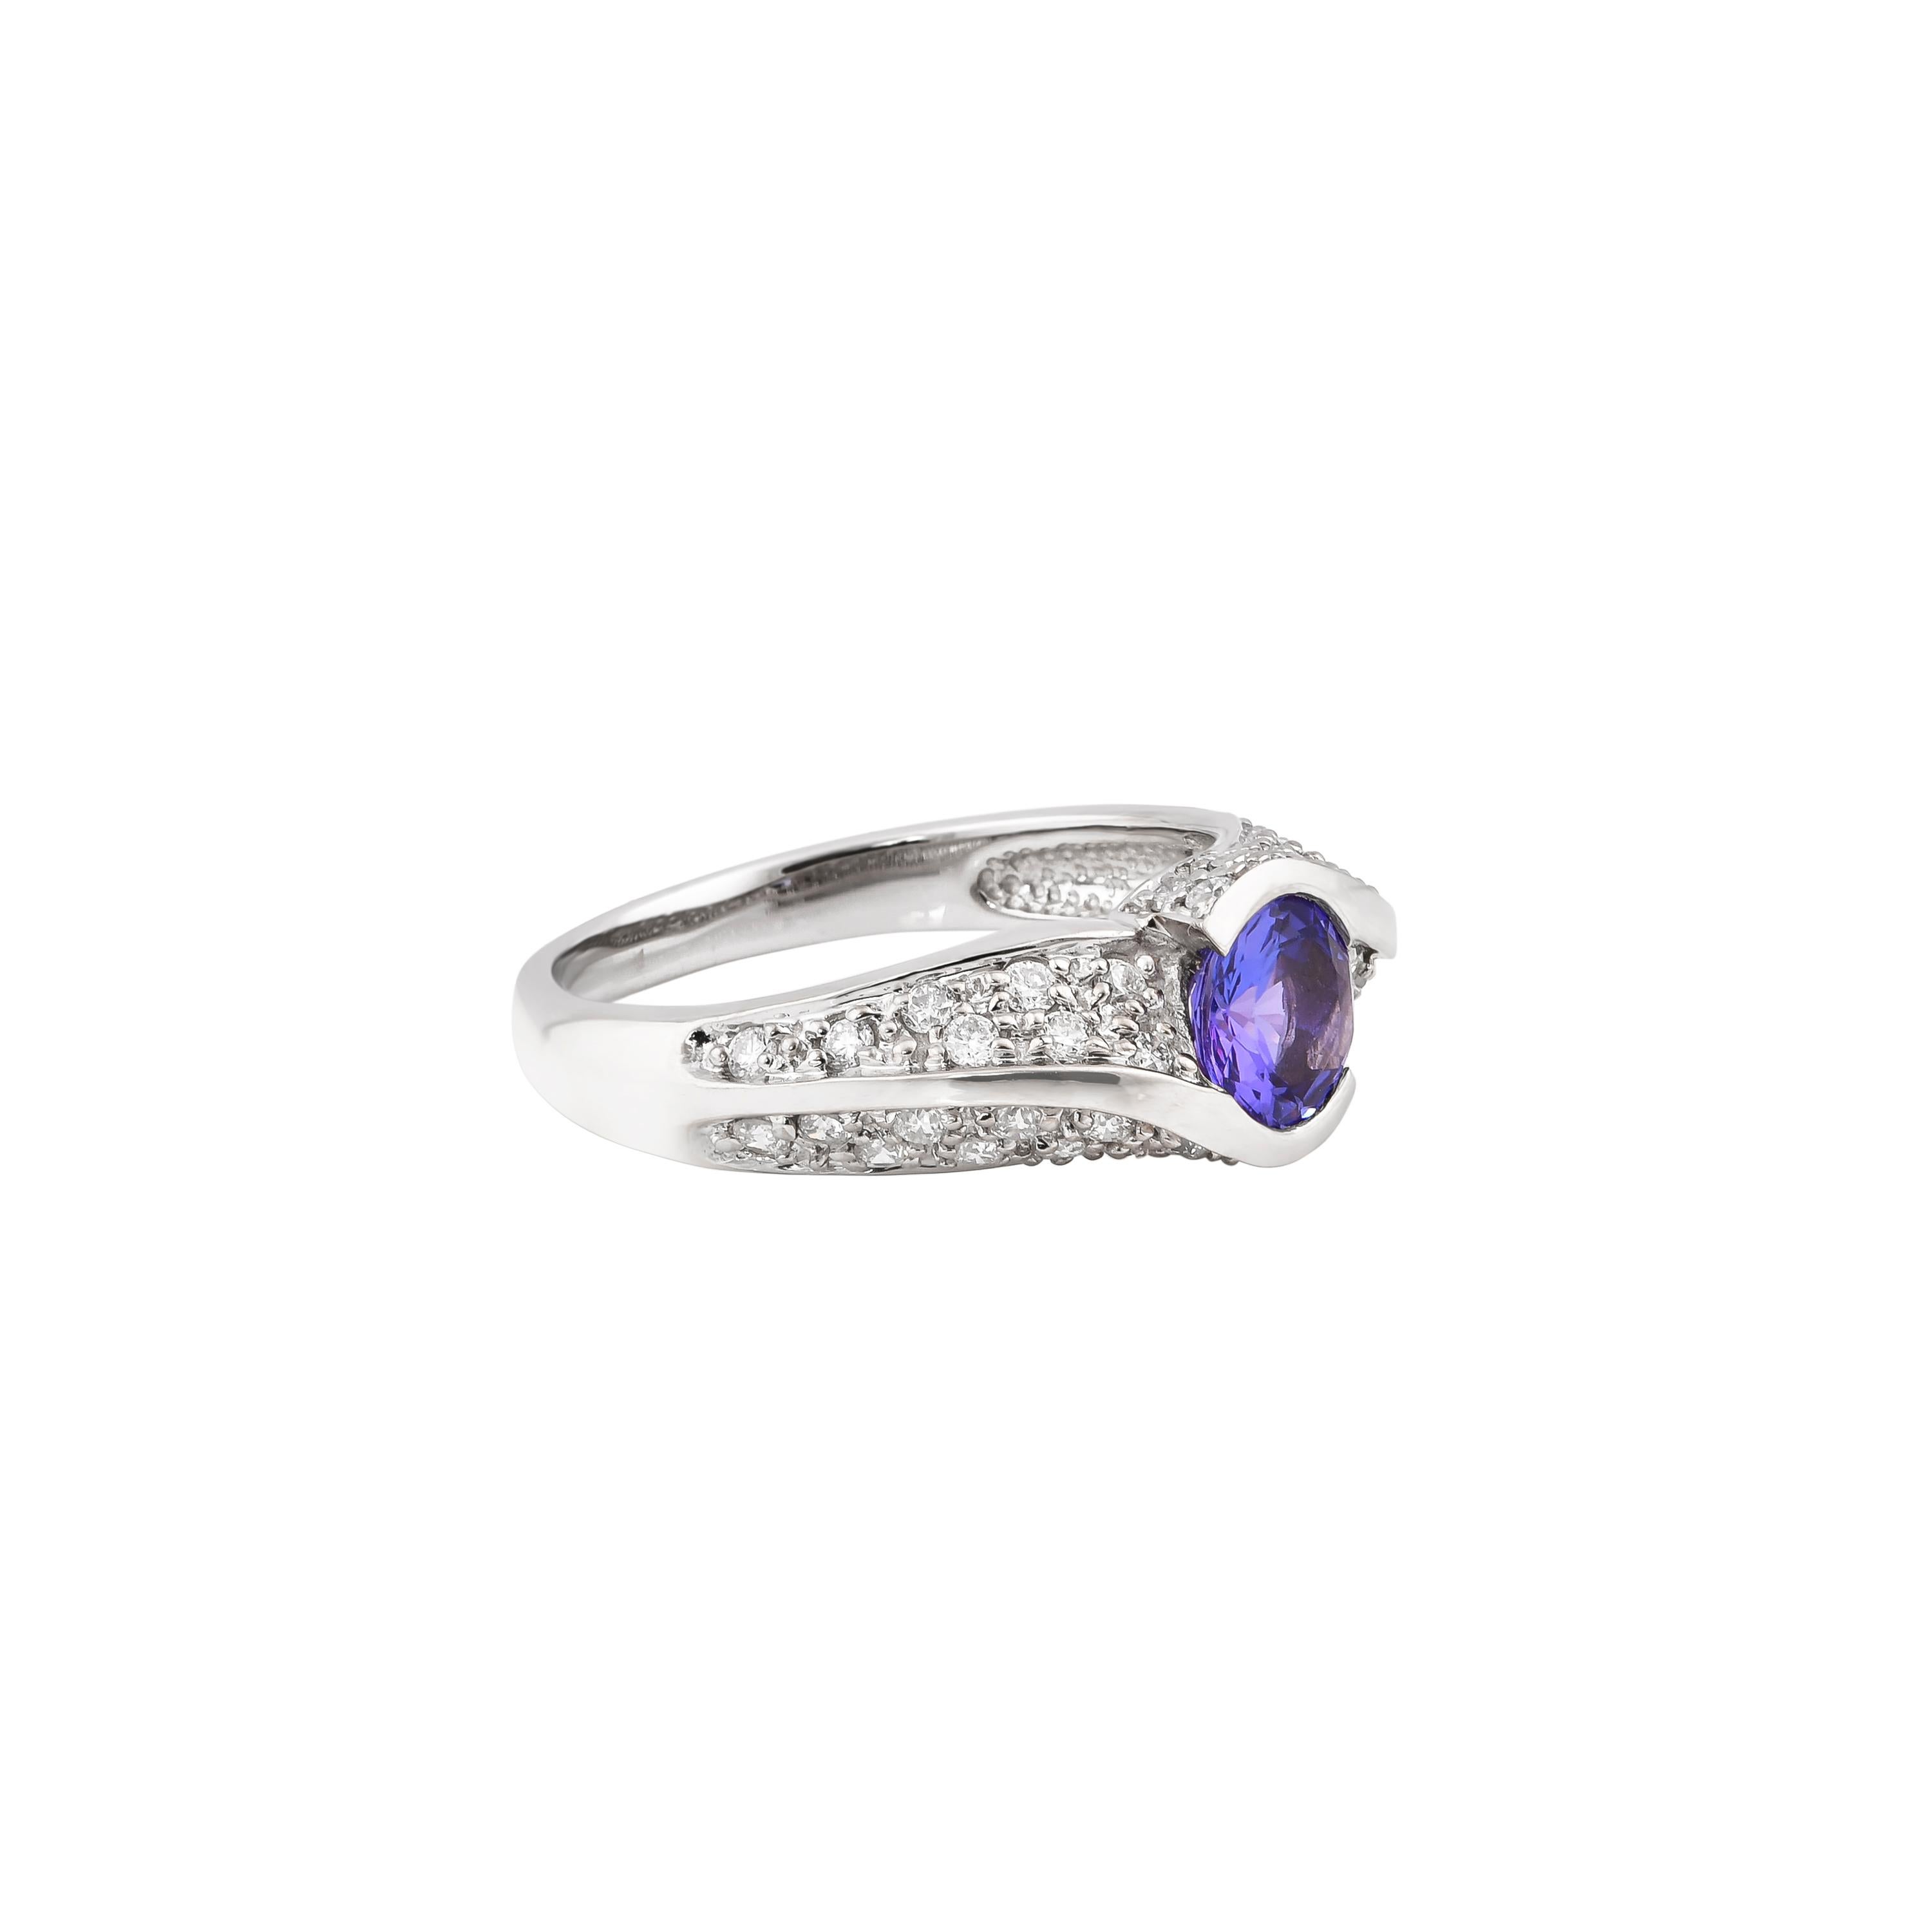 This collection features a selection of the most tantalizing Tanzanites. This enchanting East African gemstone can only be procured from one mine in the foothills of Mount Kilimanjaro, Tanzania. We have accented the rich purple-blue hues of the